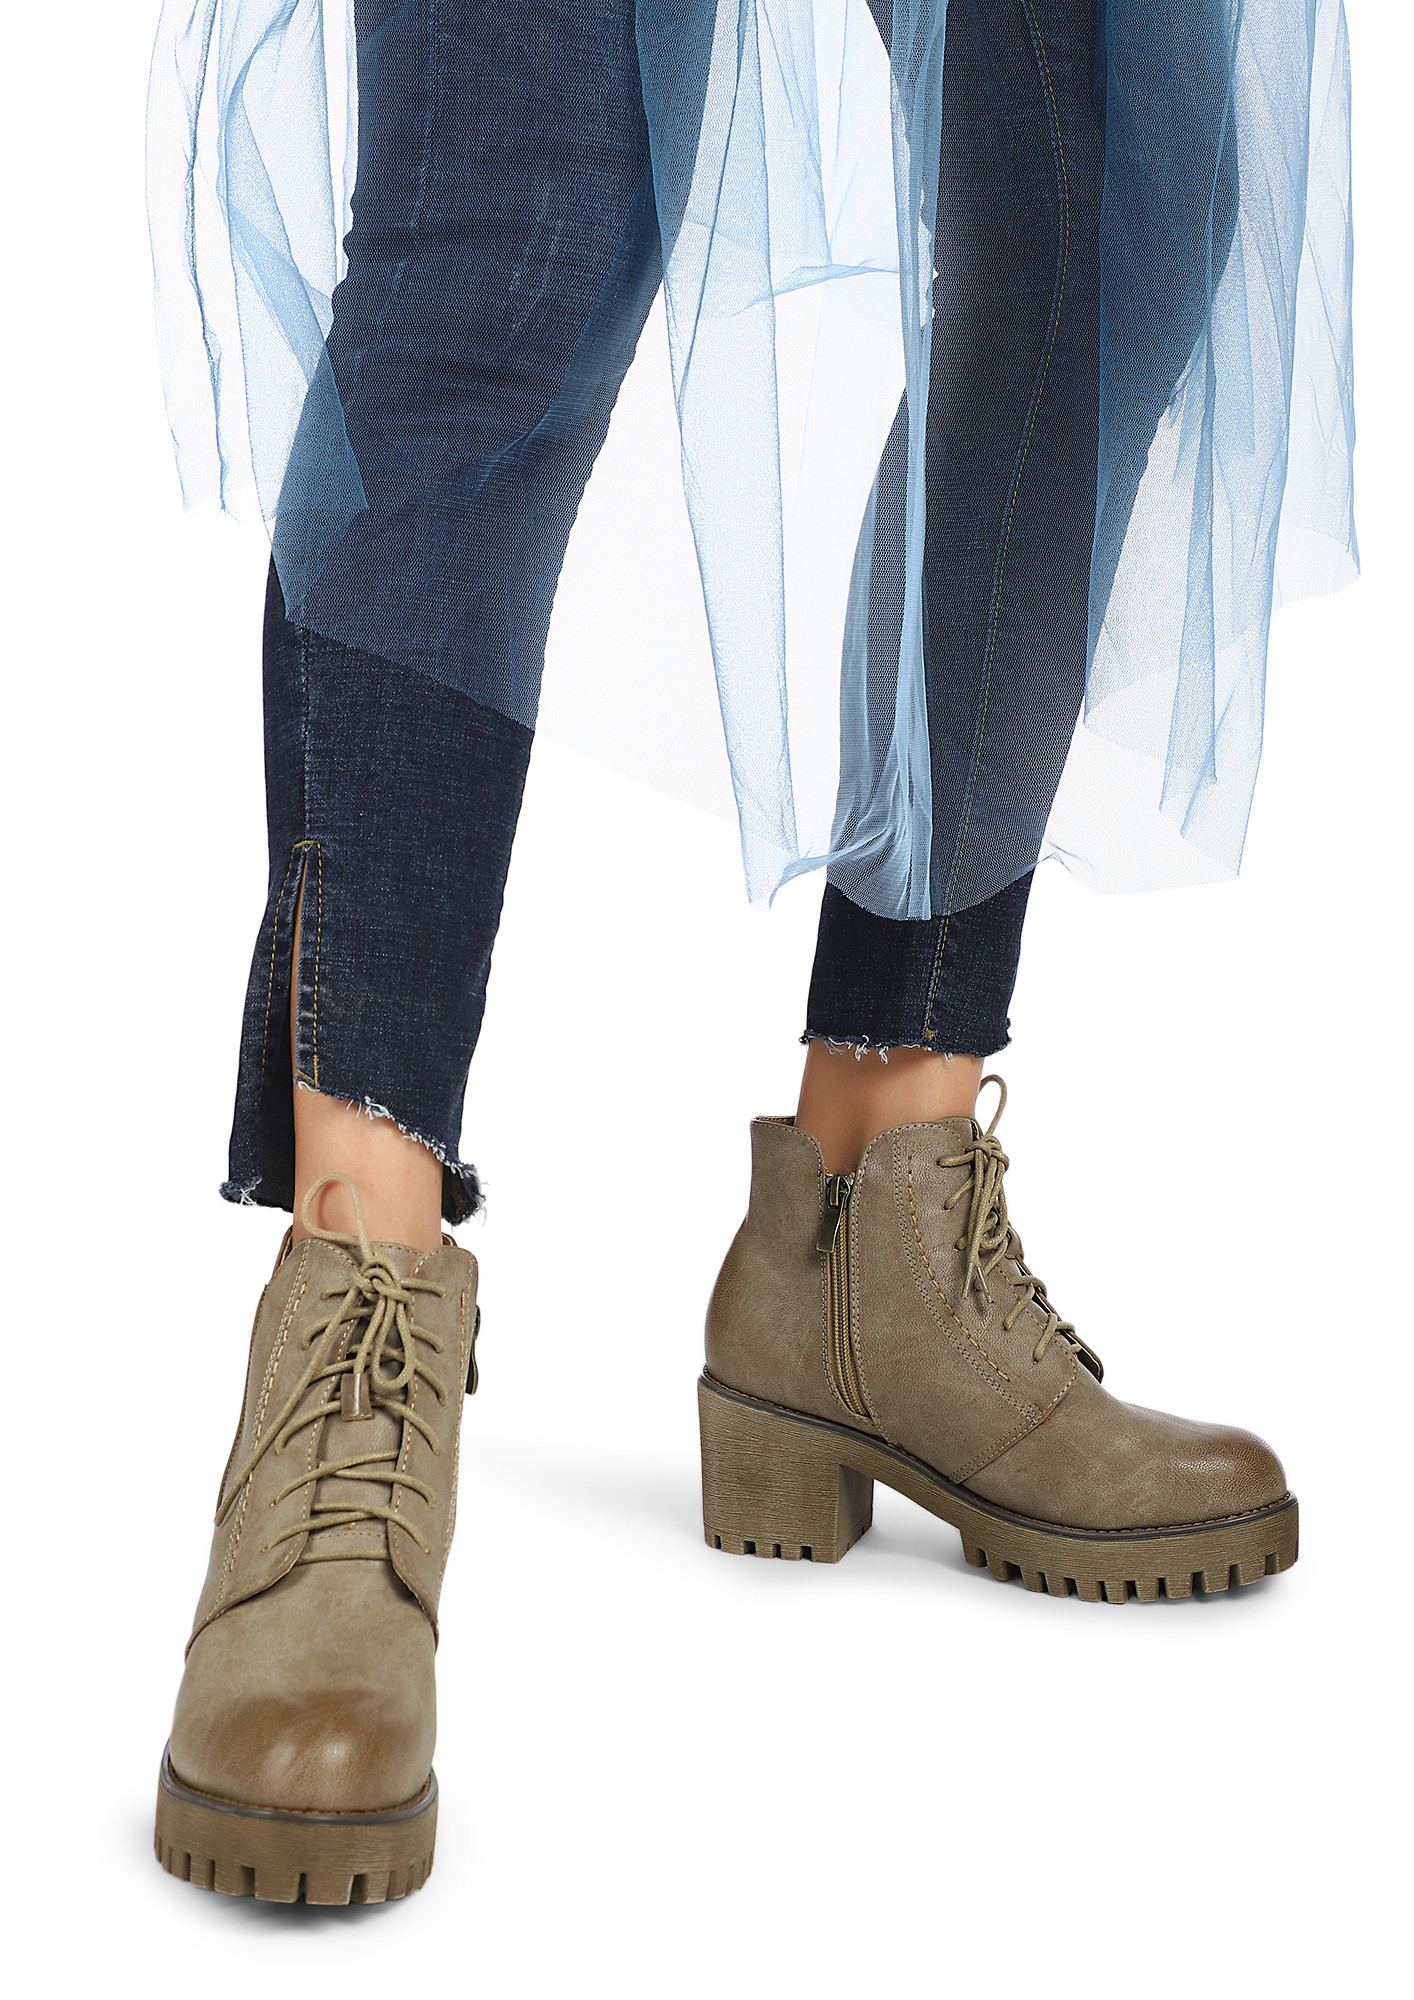 BUSY BEES KHAKI COMBAT BOOTS